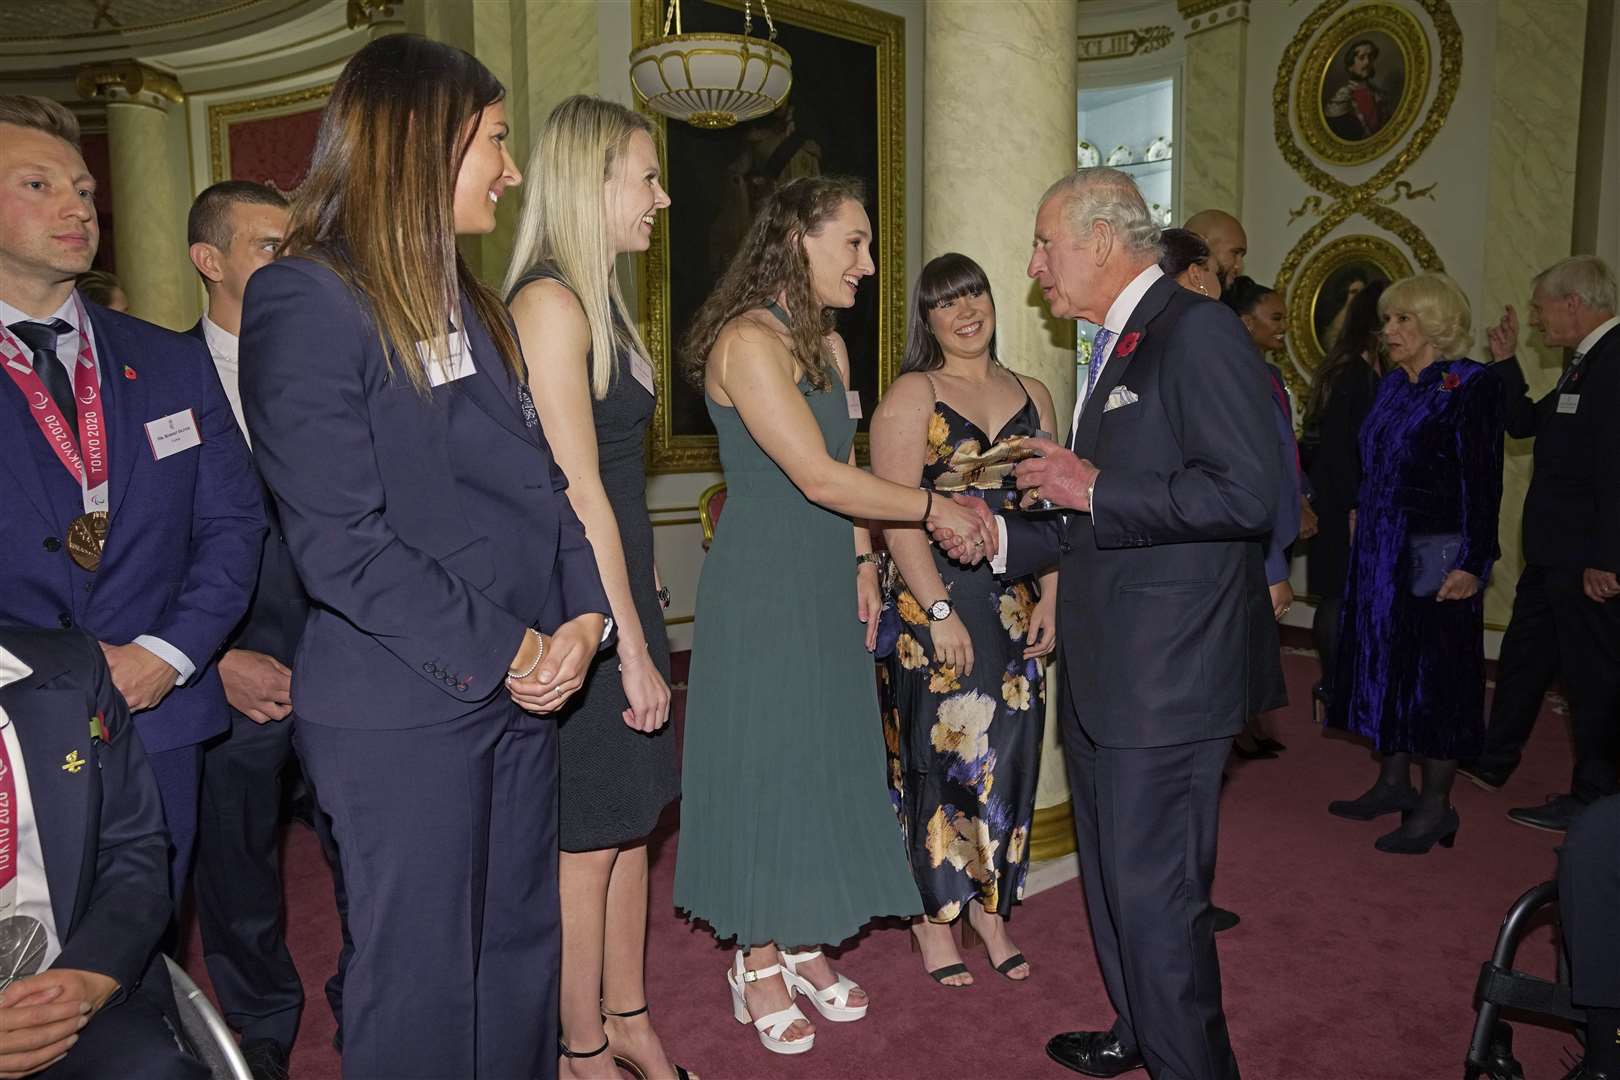 The King meets Olympic medallists, (left to right) Eve Muirhead, Vicky Wright, Jennifer Dodds and Hailey Duff (Kin Cheung/PA)